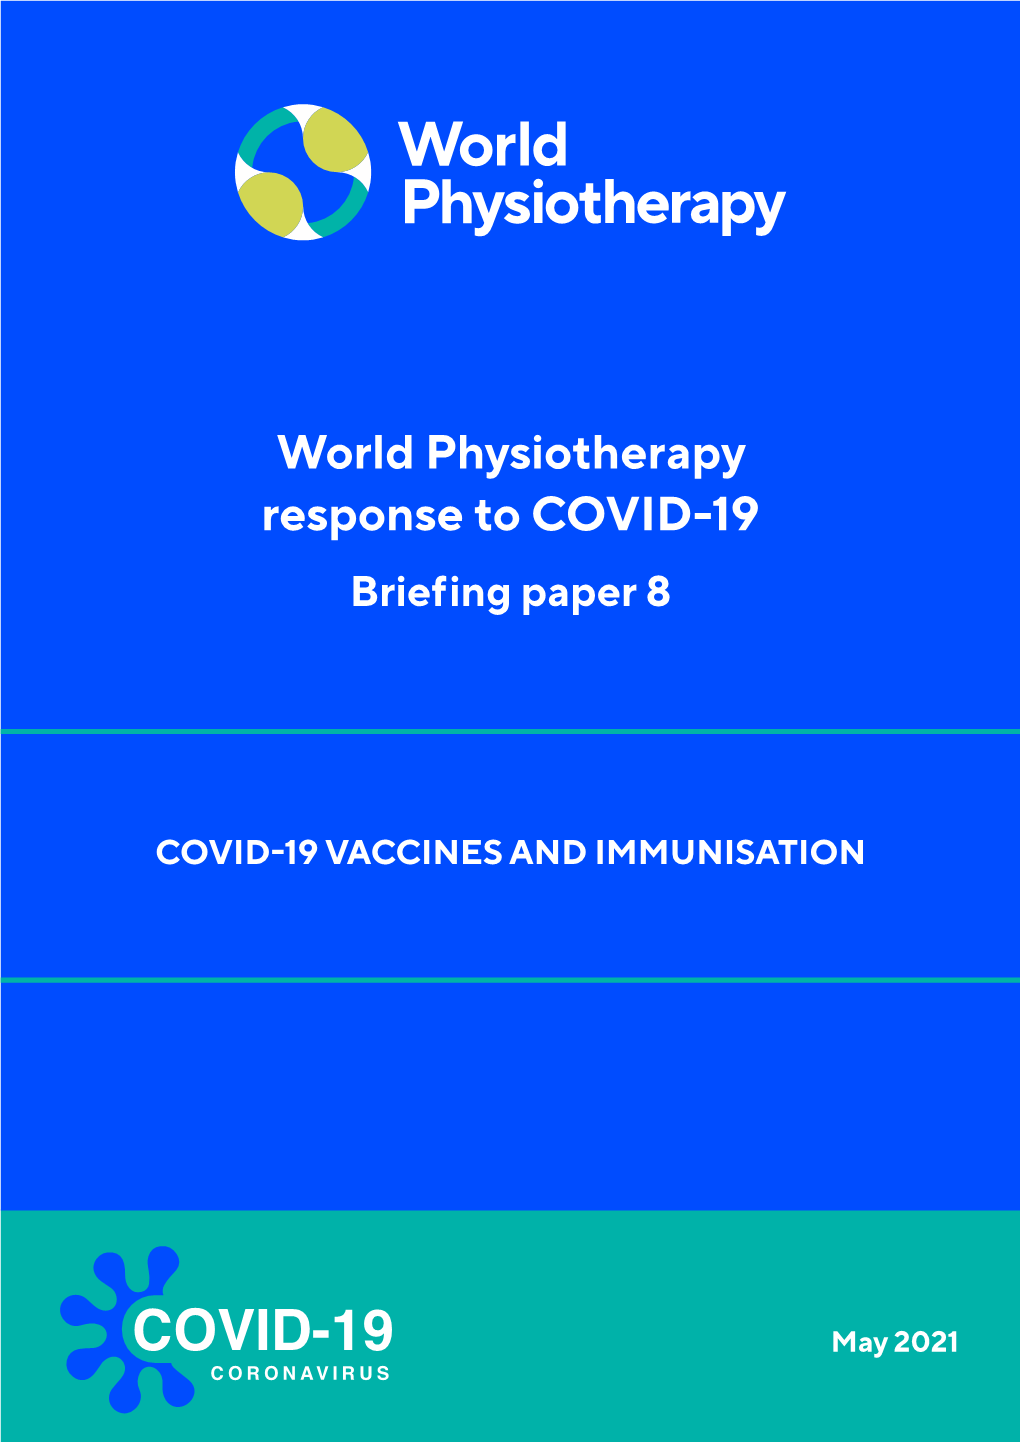 World Physiotherapy Response to COVID-19 Briefing Paper 8